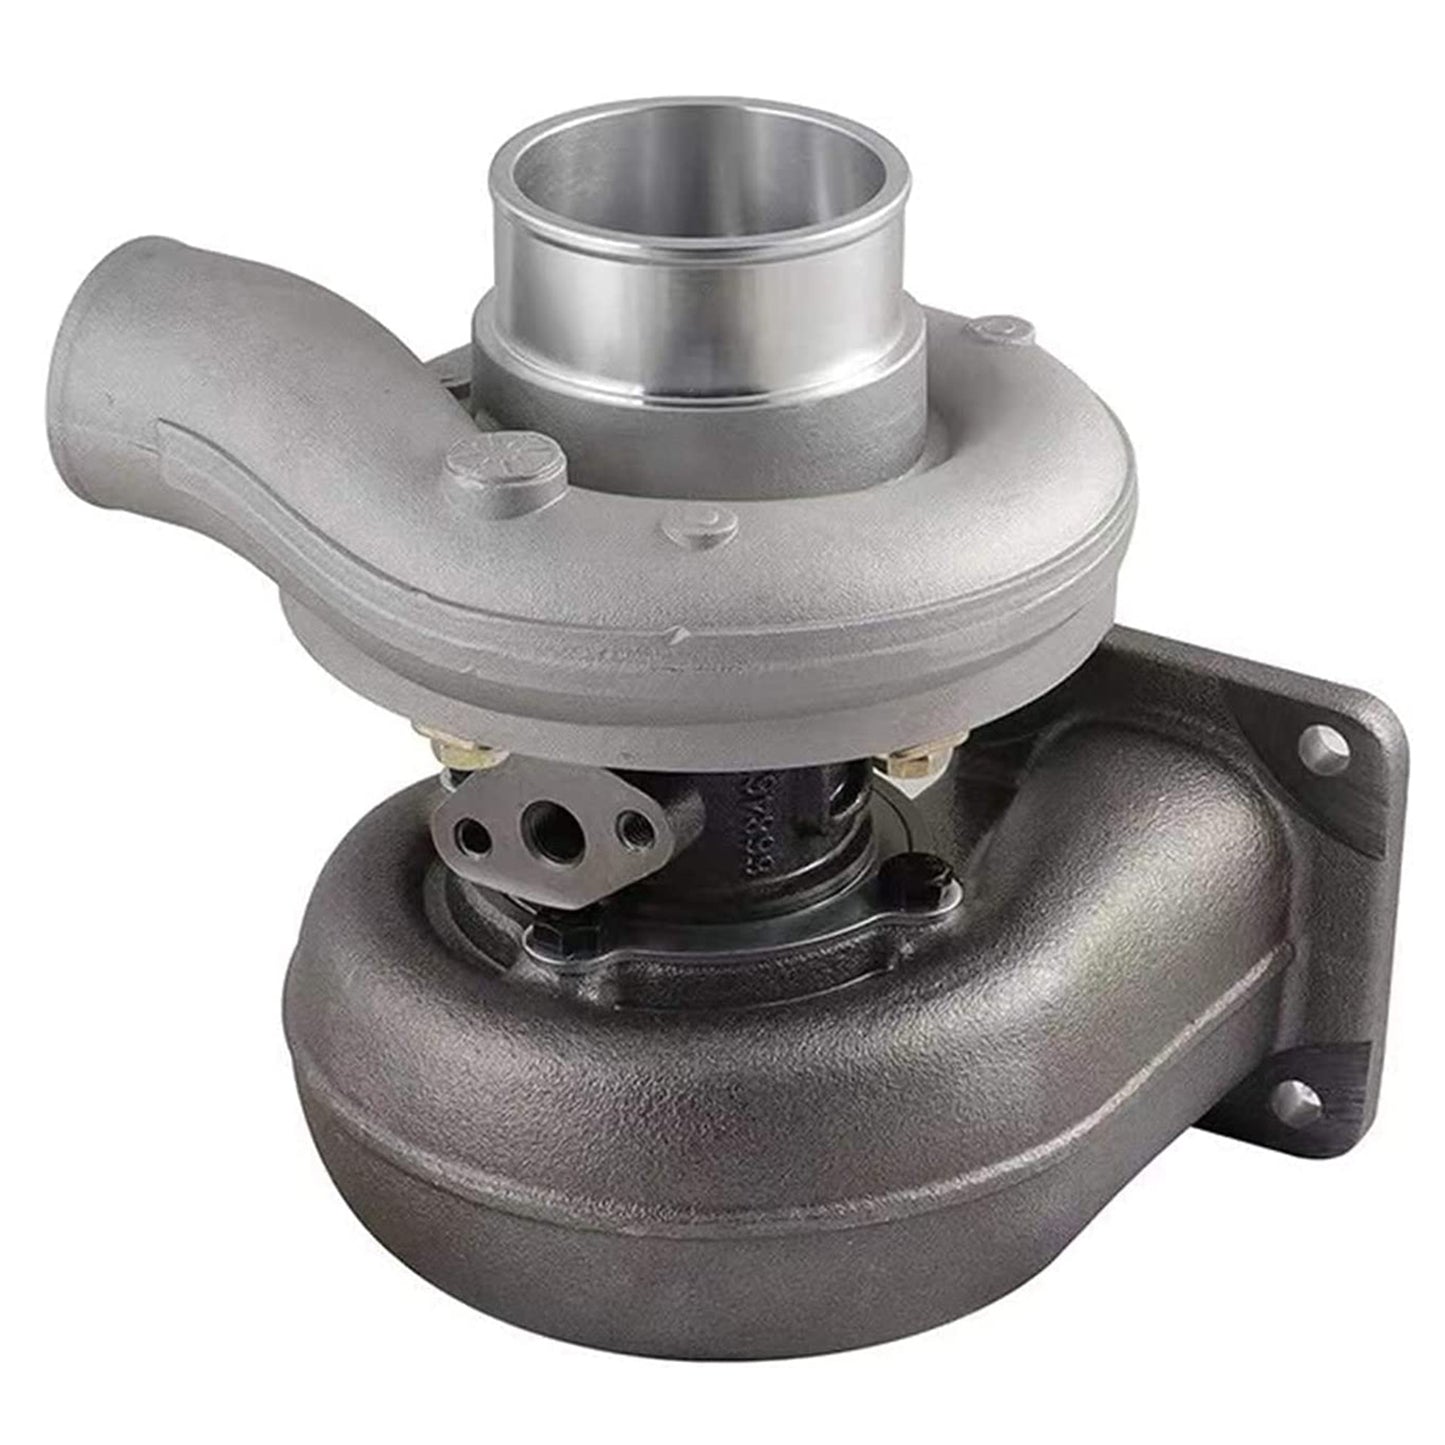 RE508971 Turbocharger Compatible with John Deere 200CLC 230LC 270CLC 270LC Engine 4045T